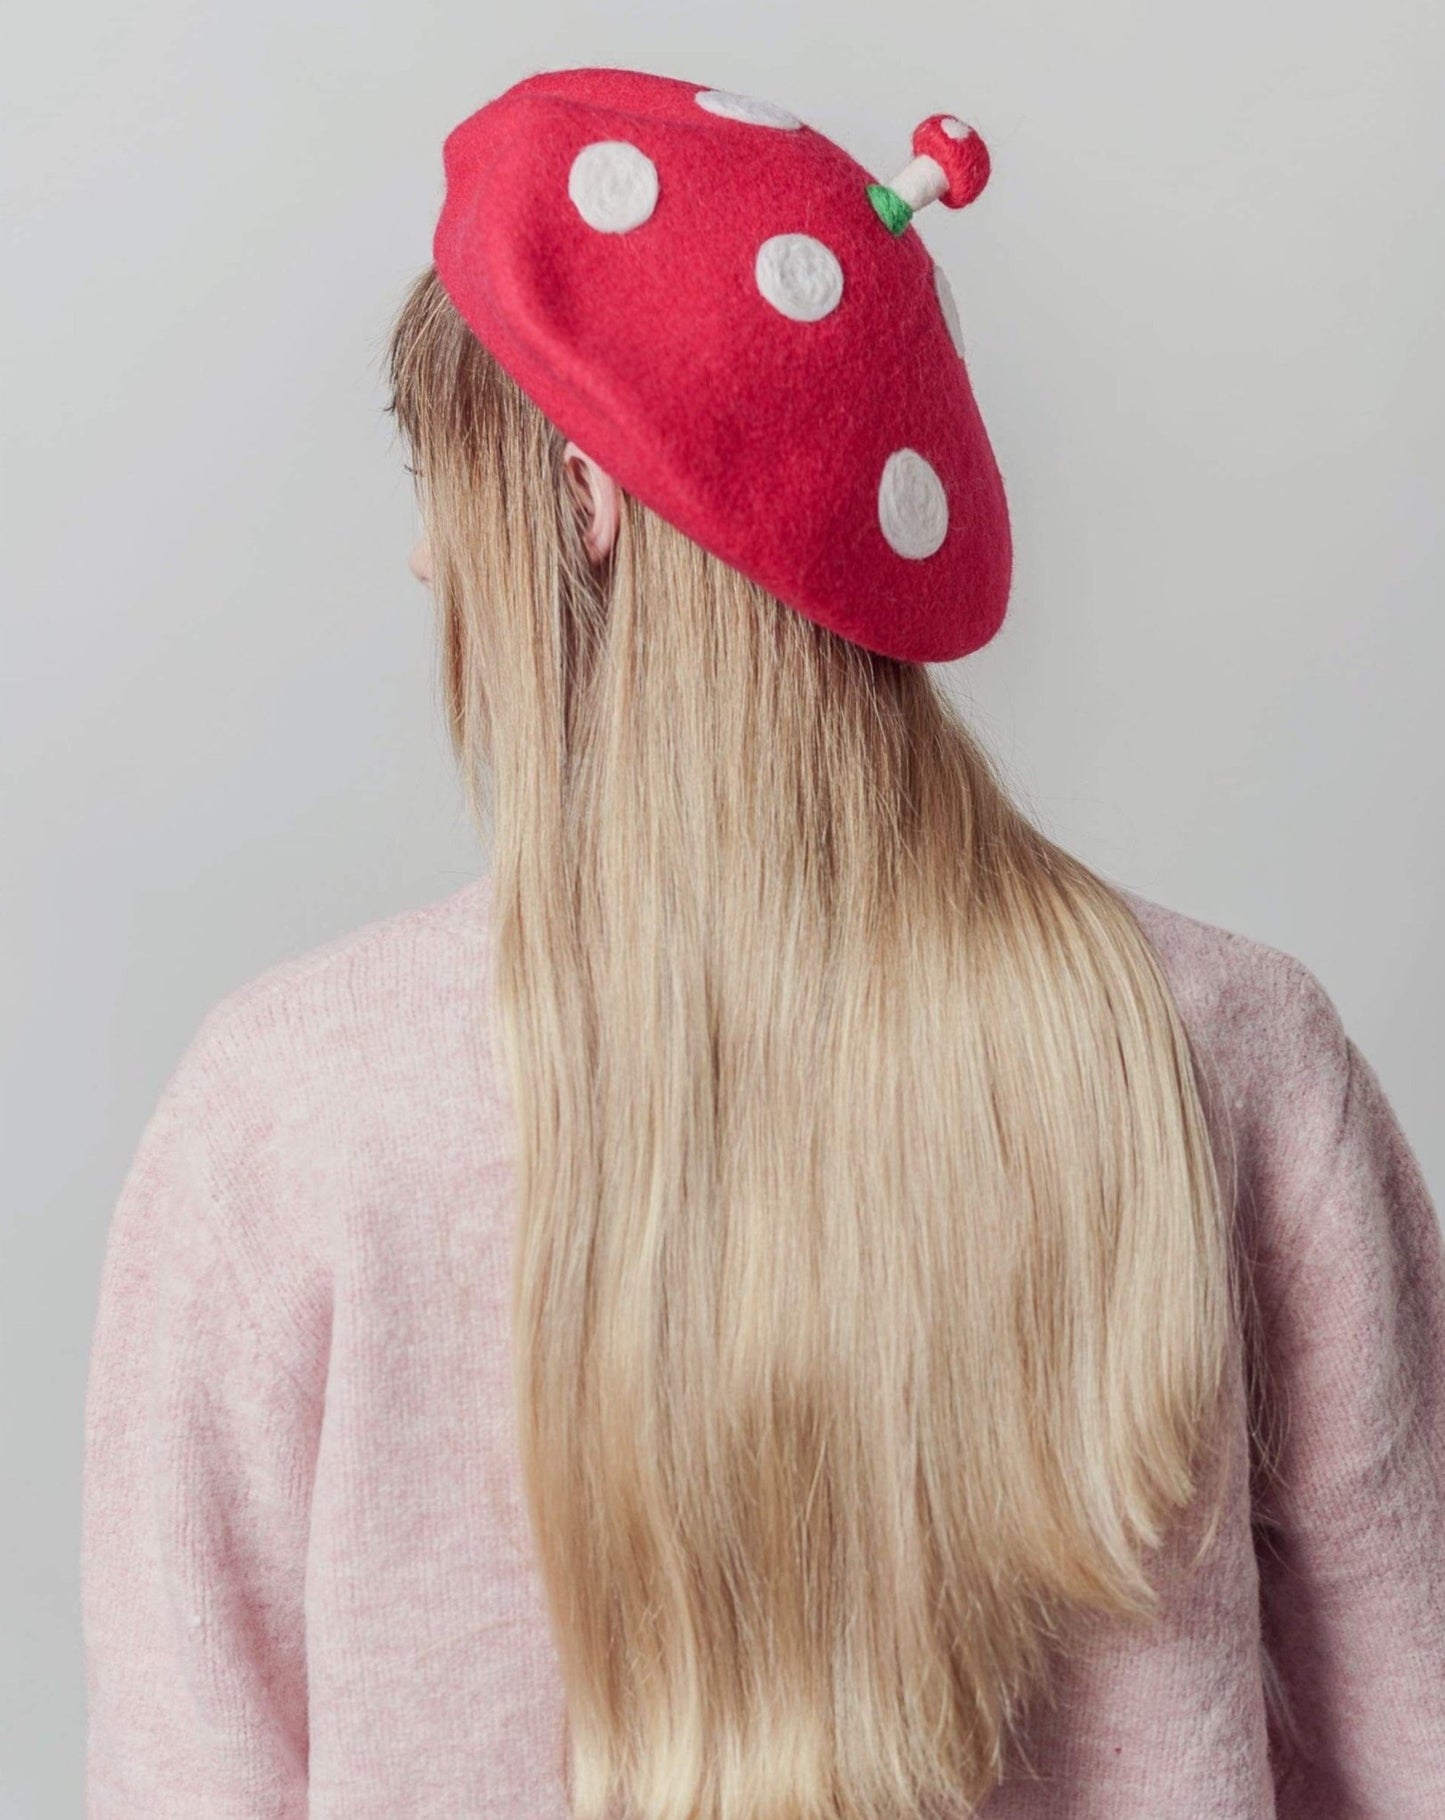 Red Mushroom Beret For Women and Kids.